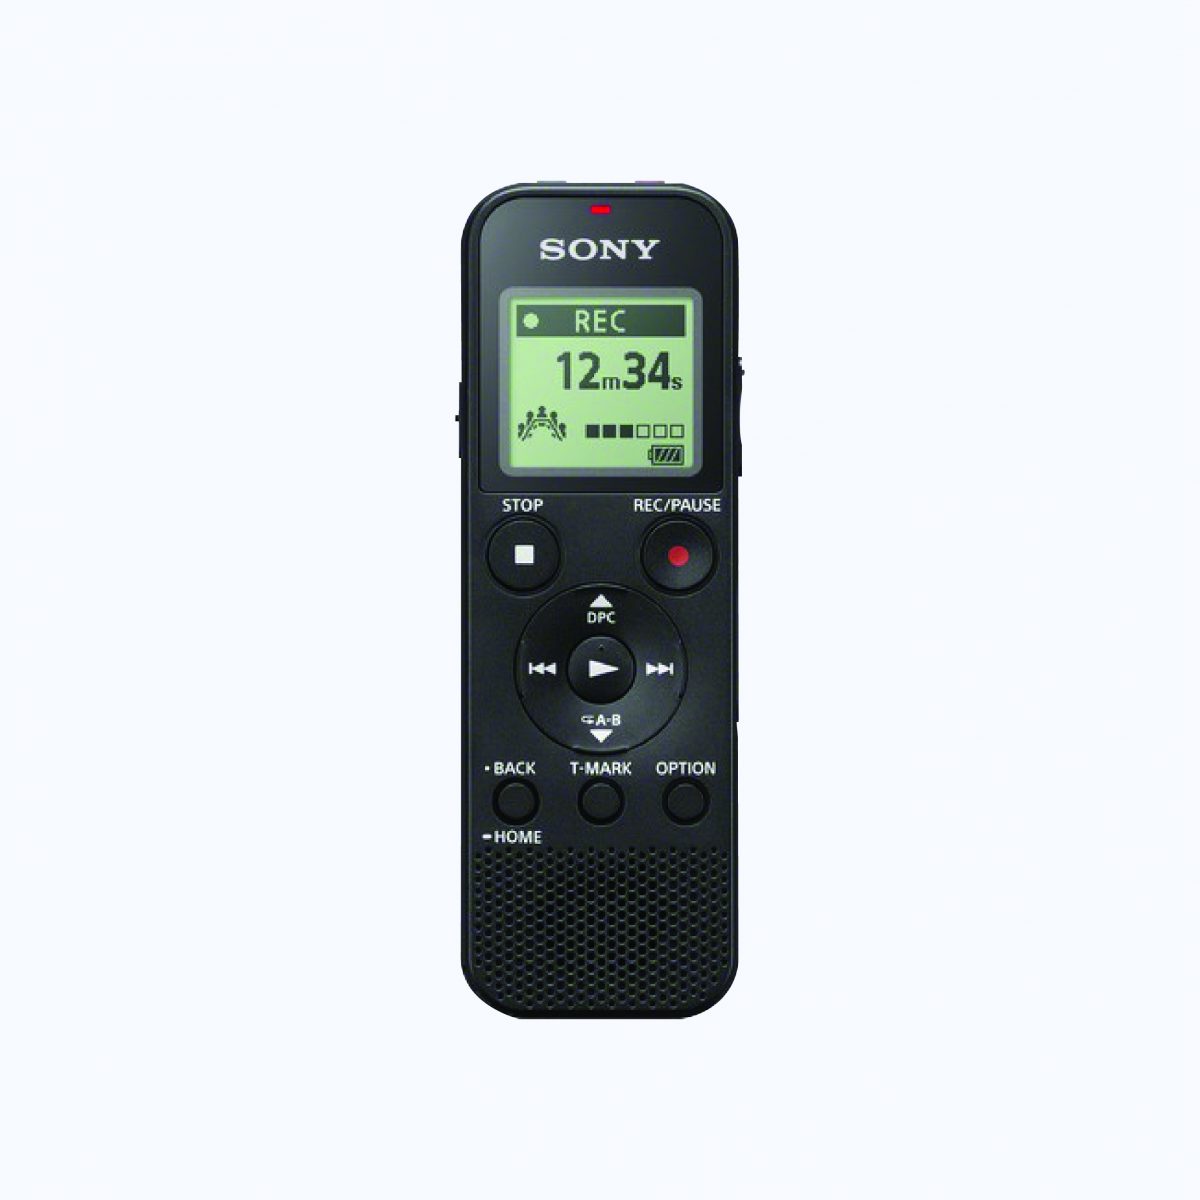 Sony ICD-PX370 Digital Voice Recorder